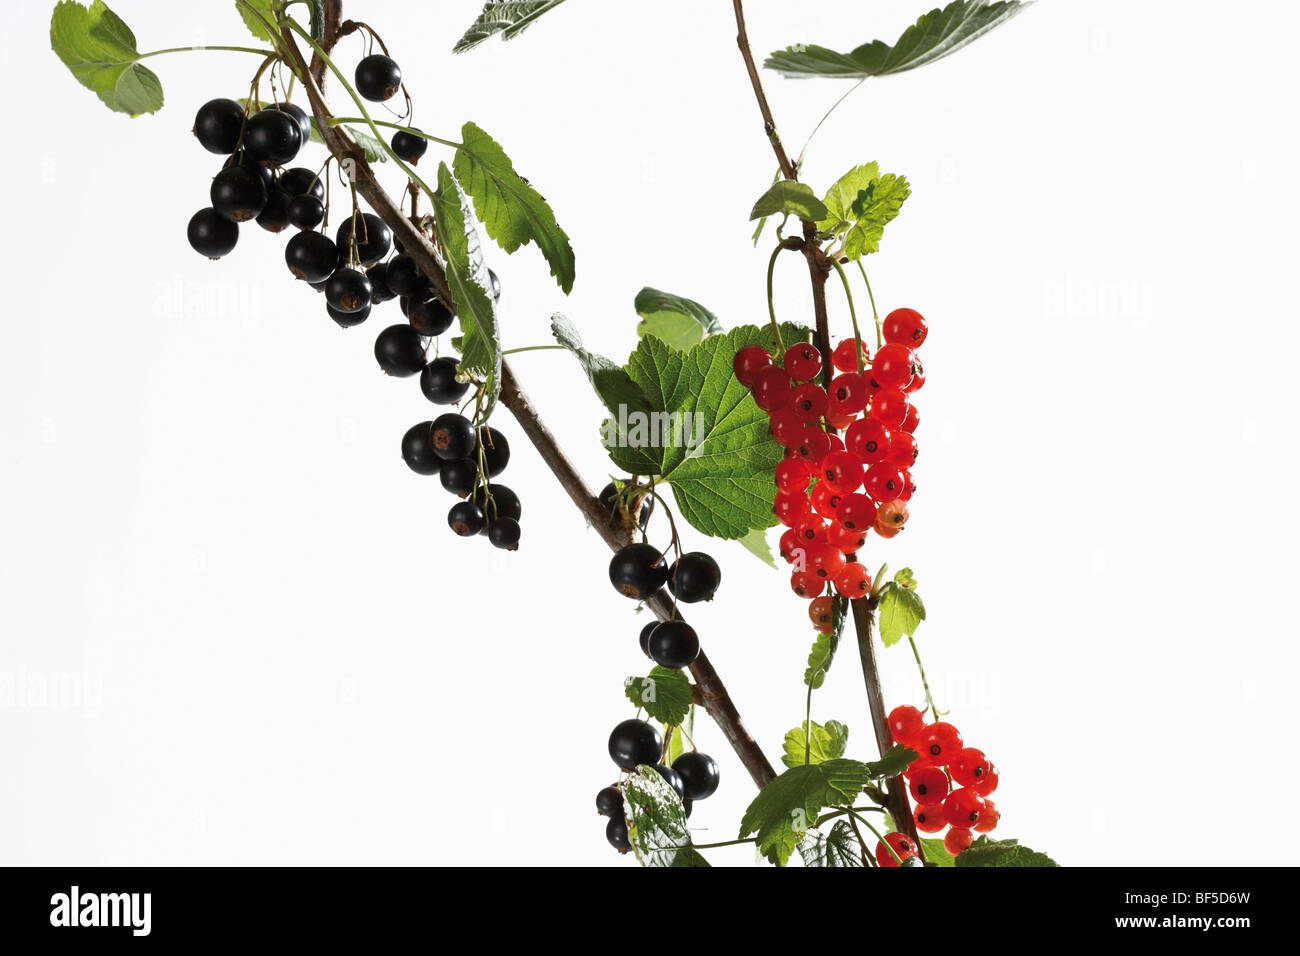 Red and black currants with leaves on a branch Stock Photo